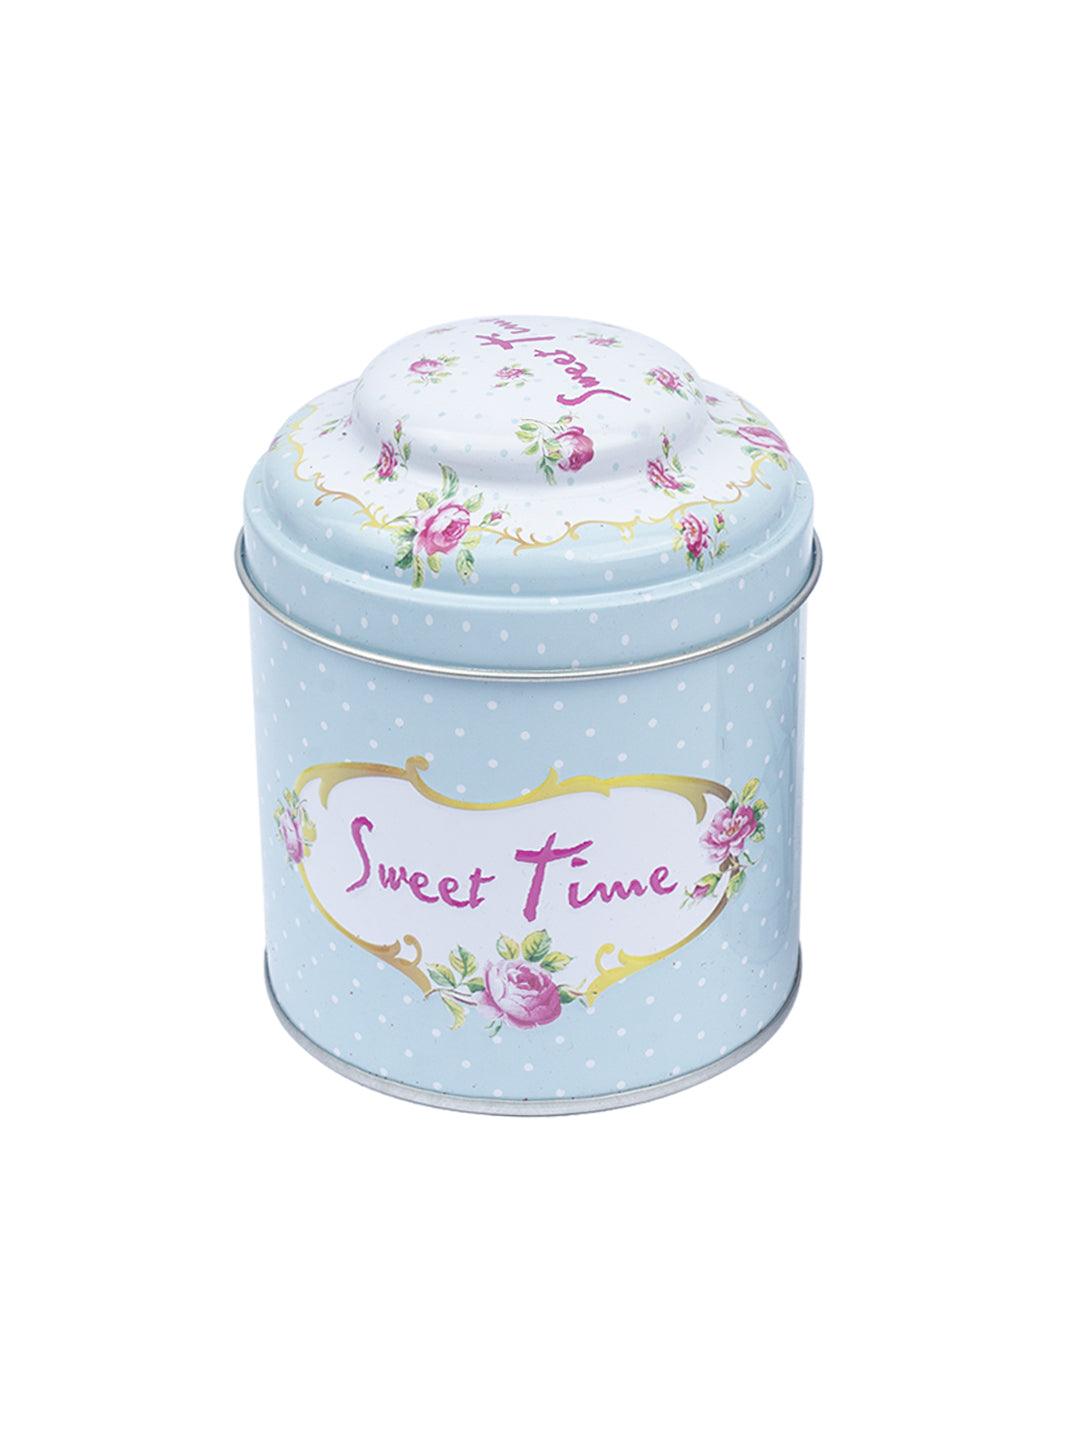 "Sweet Time" Floral Metal Tin Canister - Baby Blue - MARKET 99